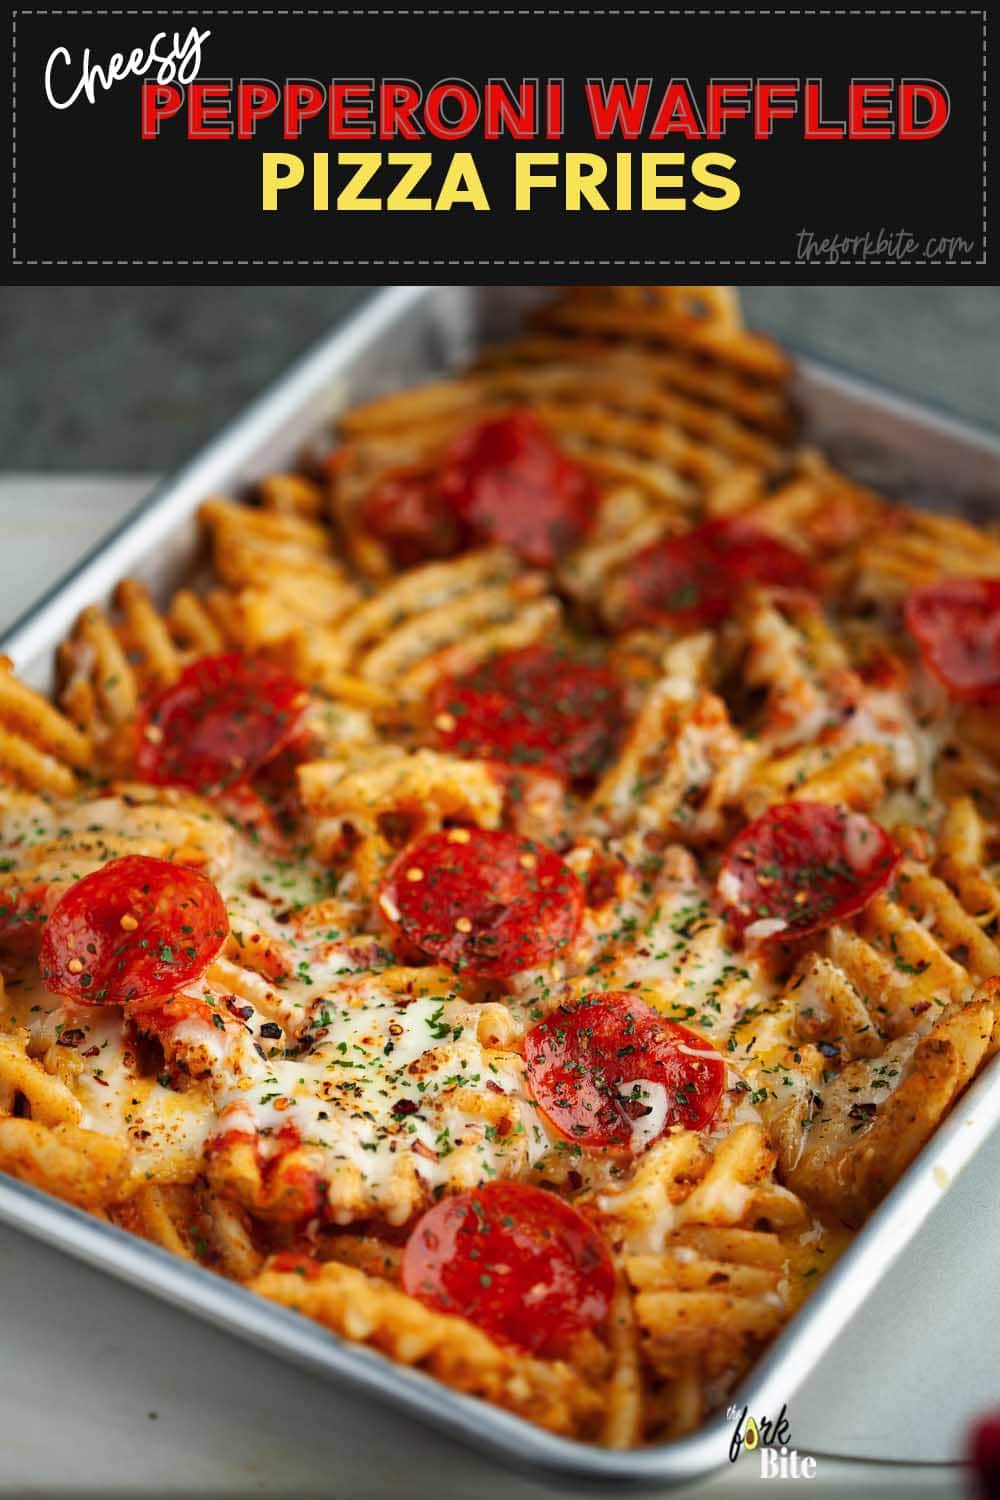 These waffled pizza fries are delectable appetizer that's more about easy assembling than cooking. Just sprinkle all your favorite pizza toppings and enjoy something to snack on.